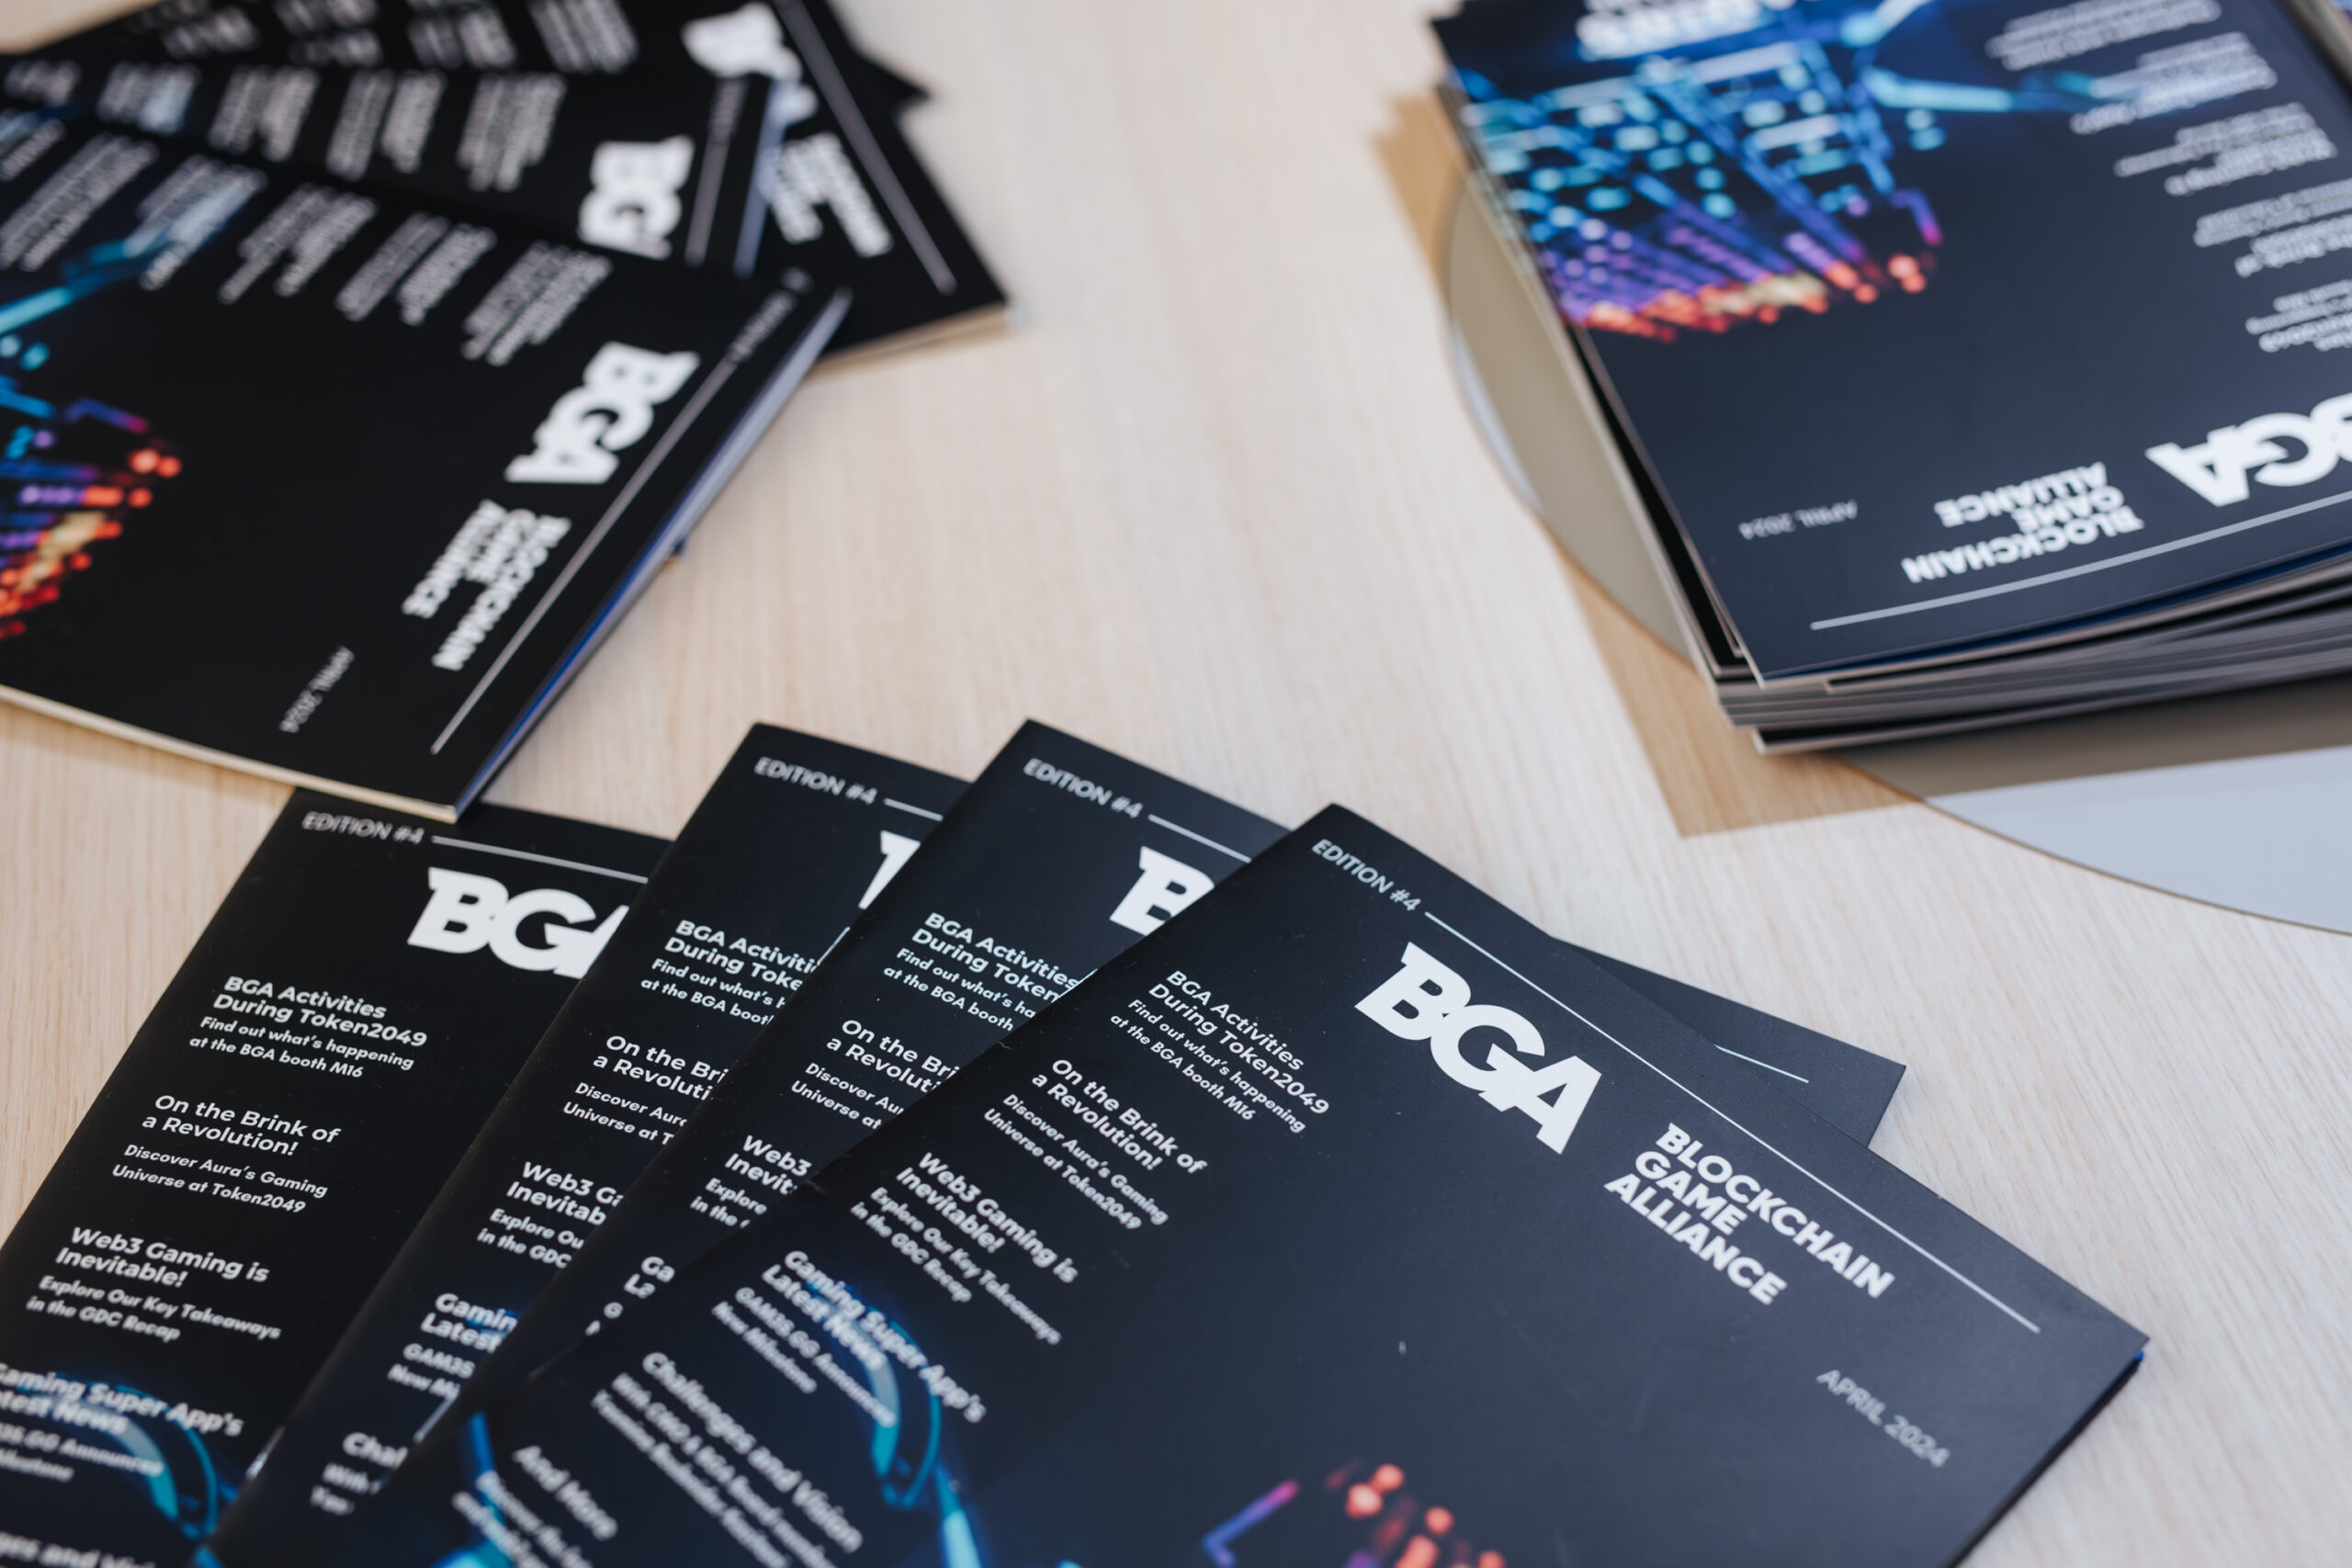 We bring our BGA Mag to you !